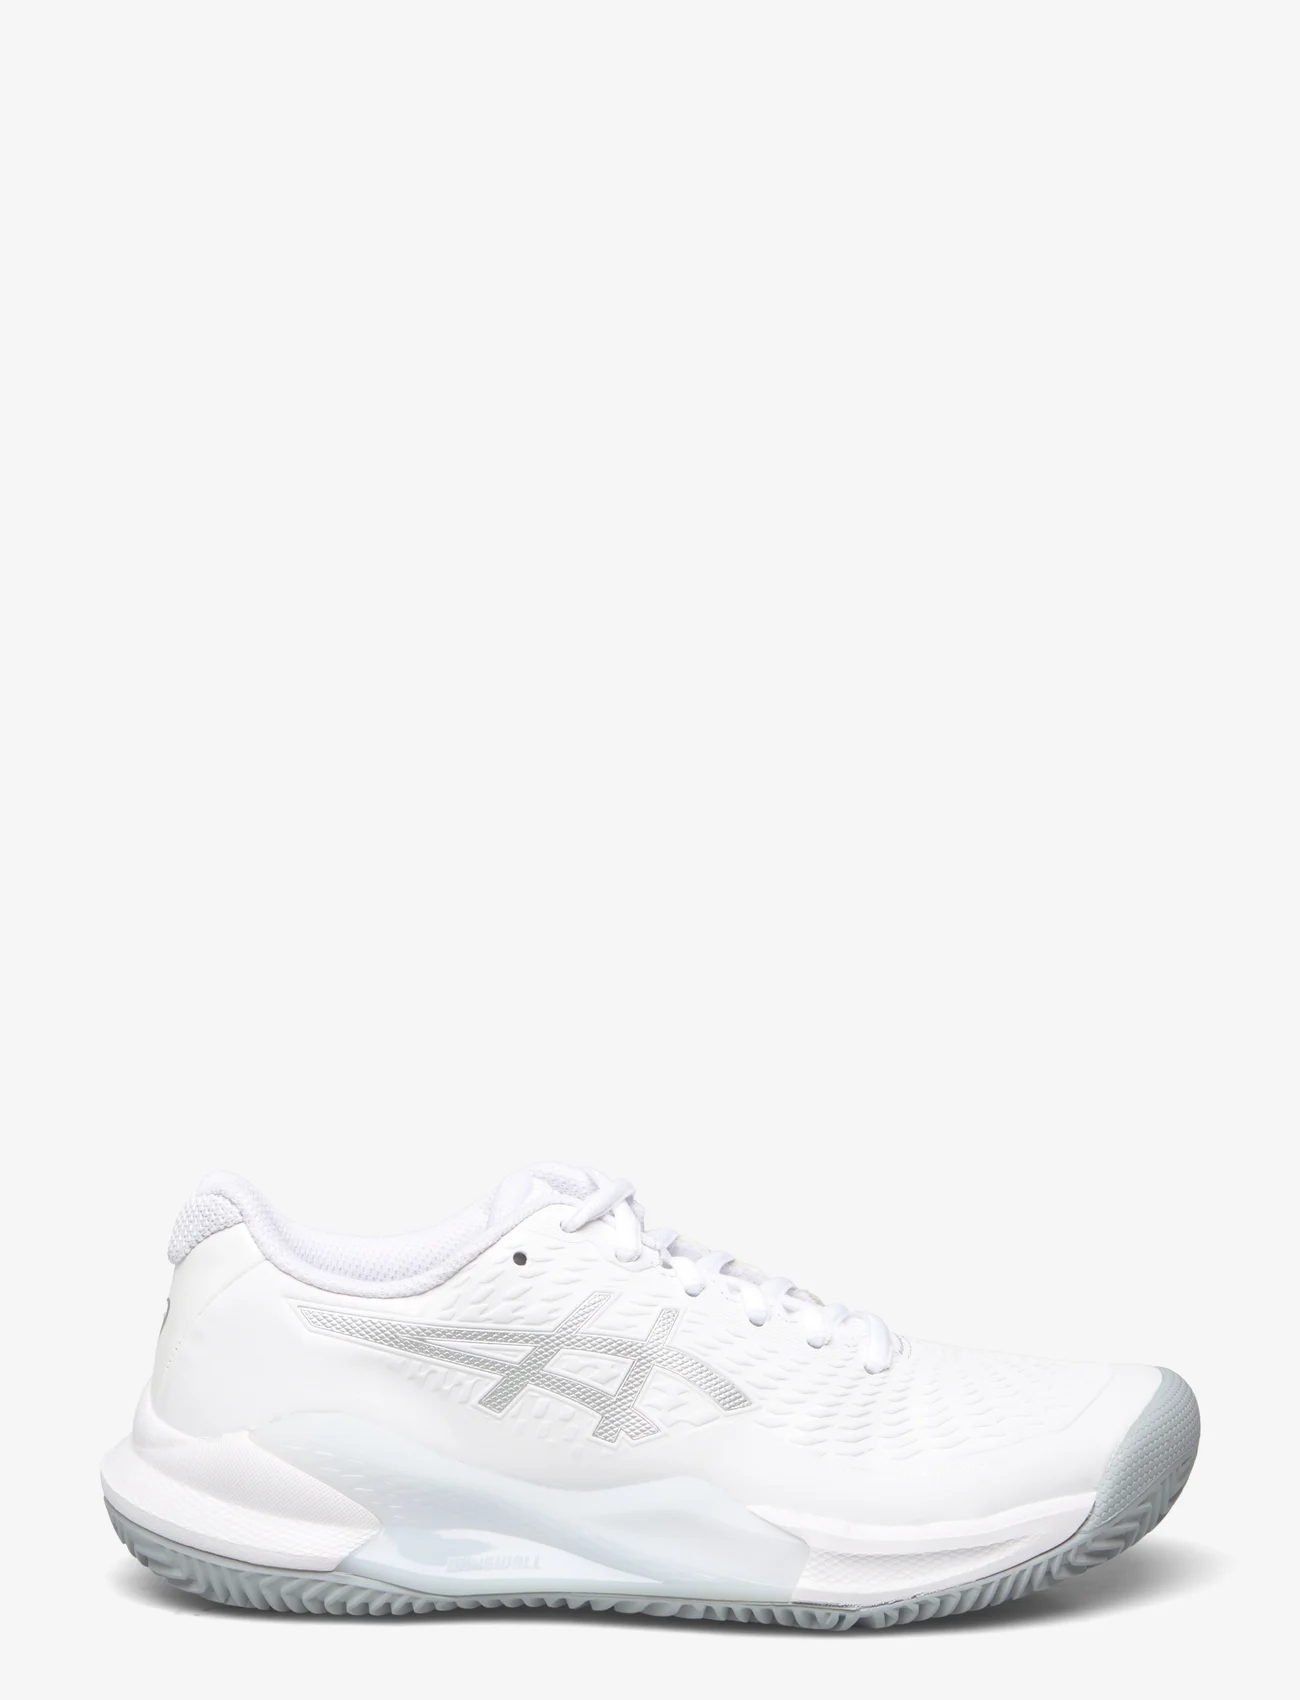 Asics - GEL-CHALLENGER 14 CLAY - white/pure silver - 1